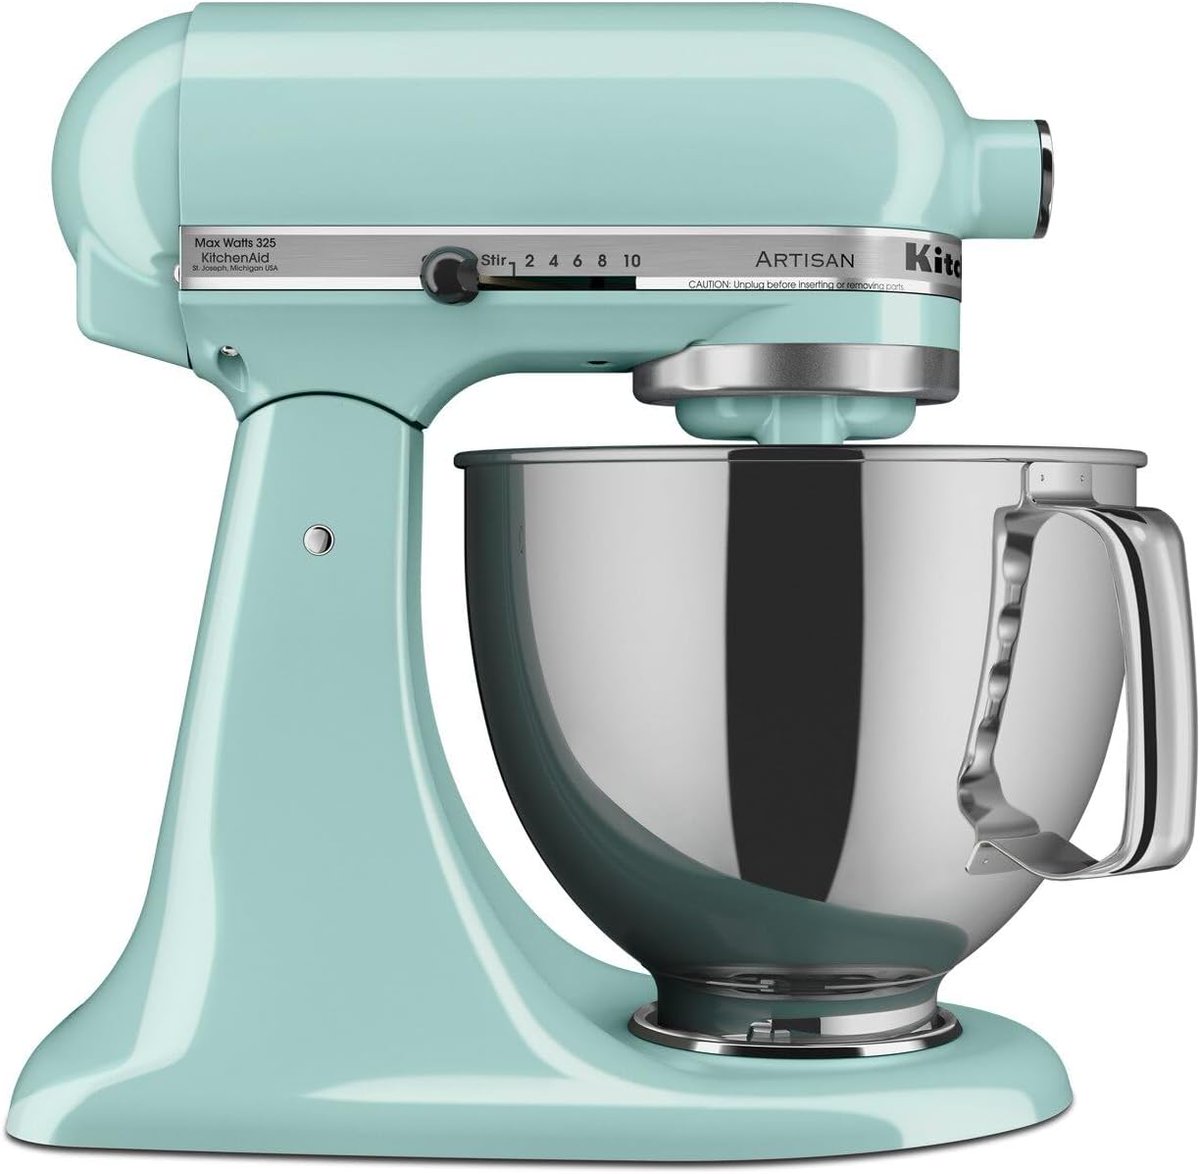 KitchenAid Artisan Series 5 Quart Tilt Head Stand Mixer with Pouring Shield -- Save 27% -- JUST $329.99 amzn.to/4b5ZVDb #kitchenaid #kitchenaiddeals #kitchenaiddeal #kitchendeals #kitchendeal #kitchen #kitchenappliances #kitchenappliance #deals #standmixer #standmixers